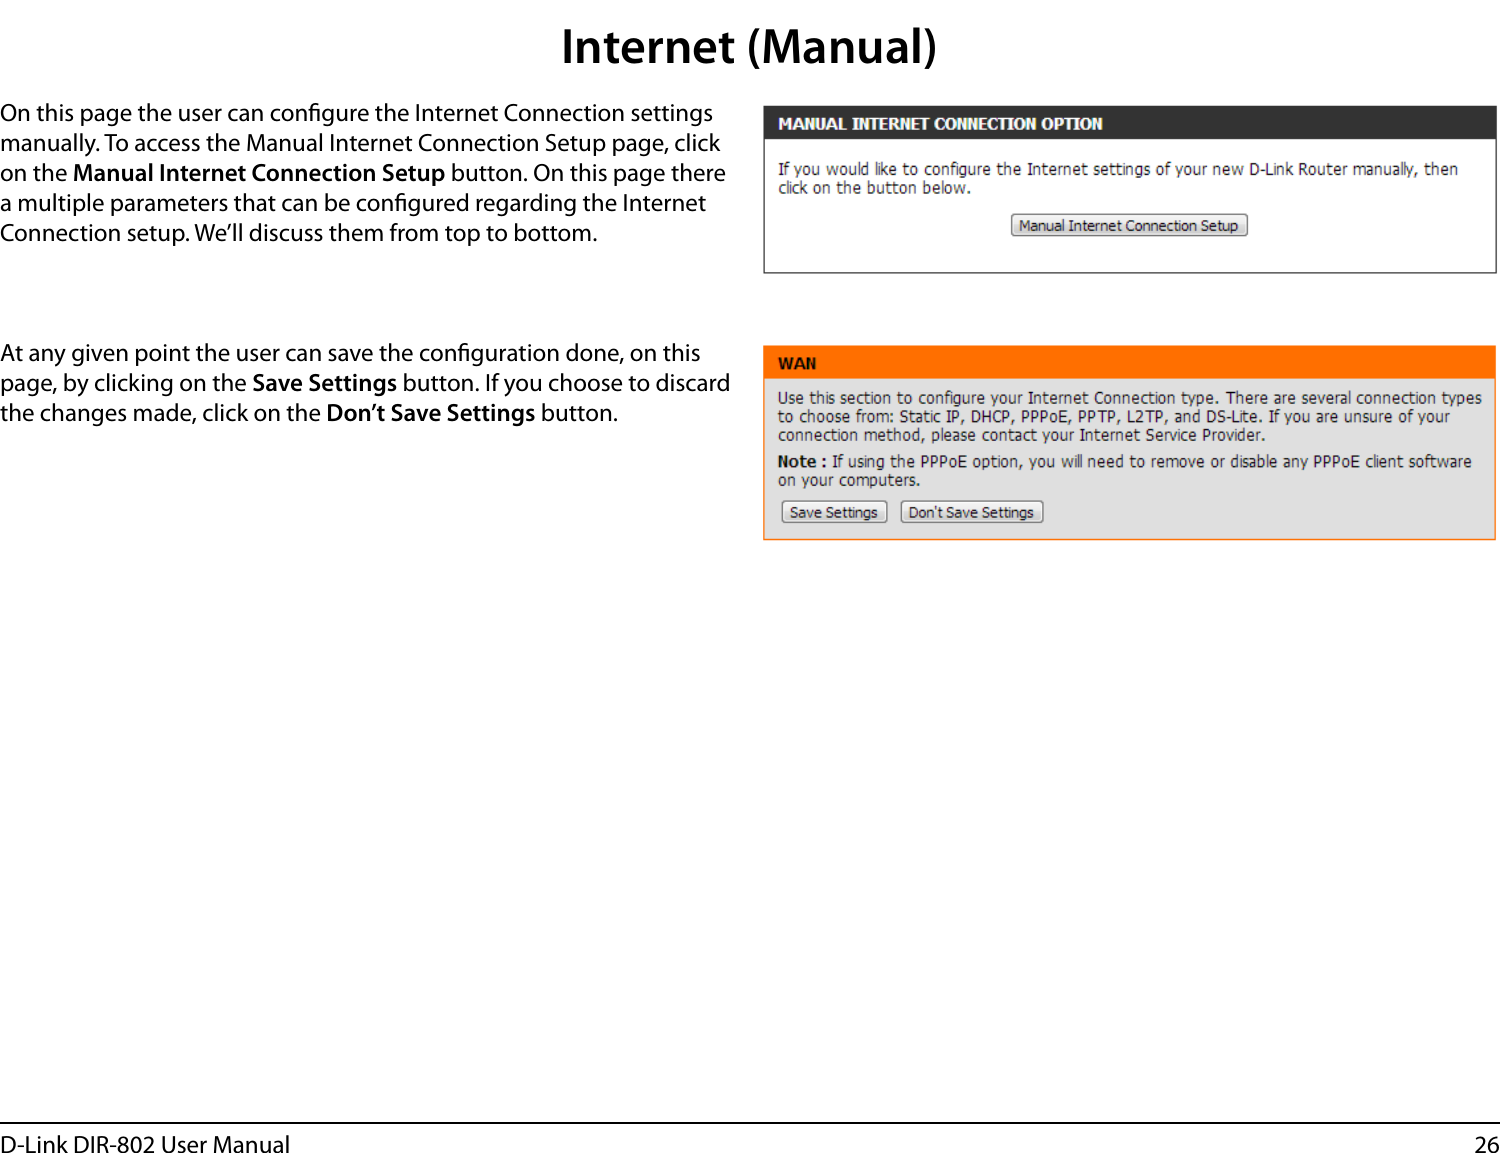 26D-Link DIR-802 User ManualInternet (Manual)On this page the user can congure the Internet Connection settings manually. To access the Manual Internet Connection Setup page, click on the Manual Internet Connection Setup button. On this page there a multiple parameters that can be congured regarding the Internet Connection setup. We’ll discuss them from top to bottom.At any given point the user can save the conguration done, on this page, by clicking on the Save Settings button. If you choose to discard the changes made, click on the Don’t Save Settings button.